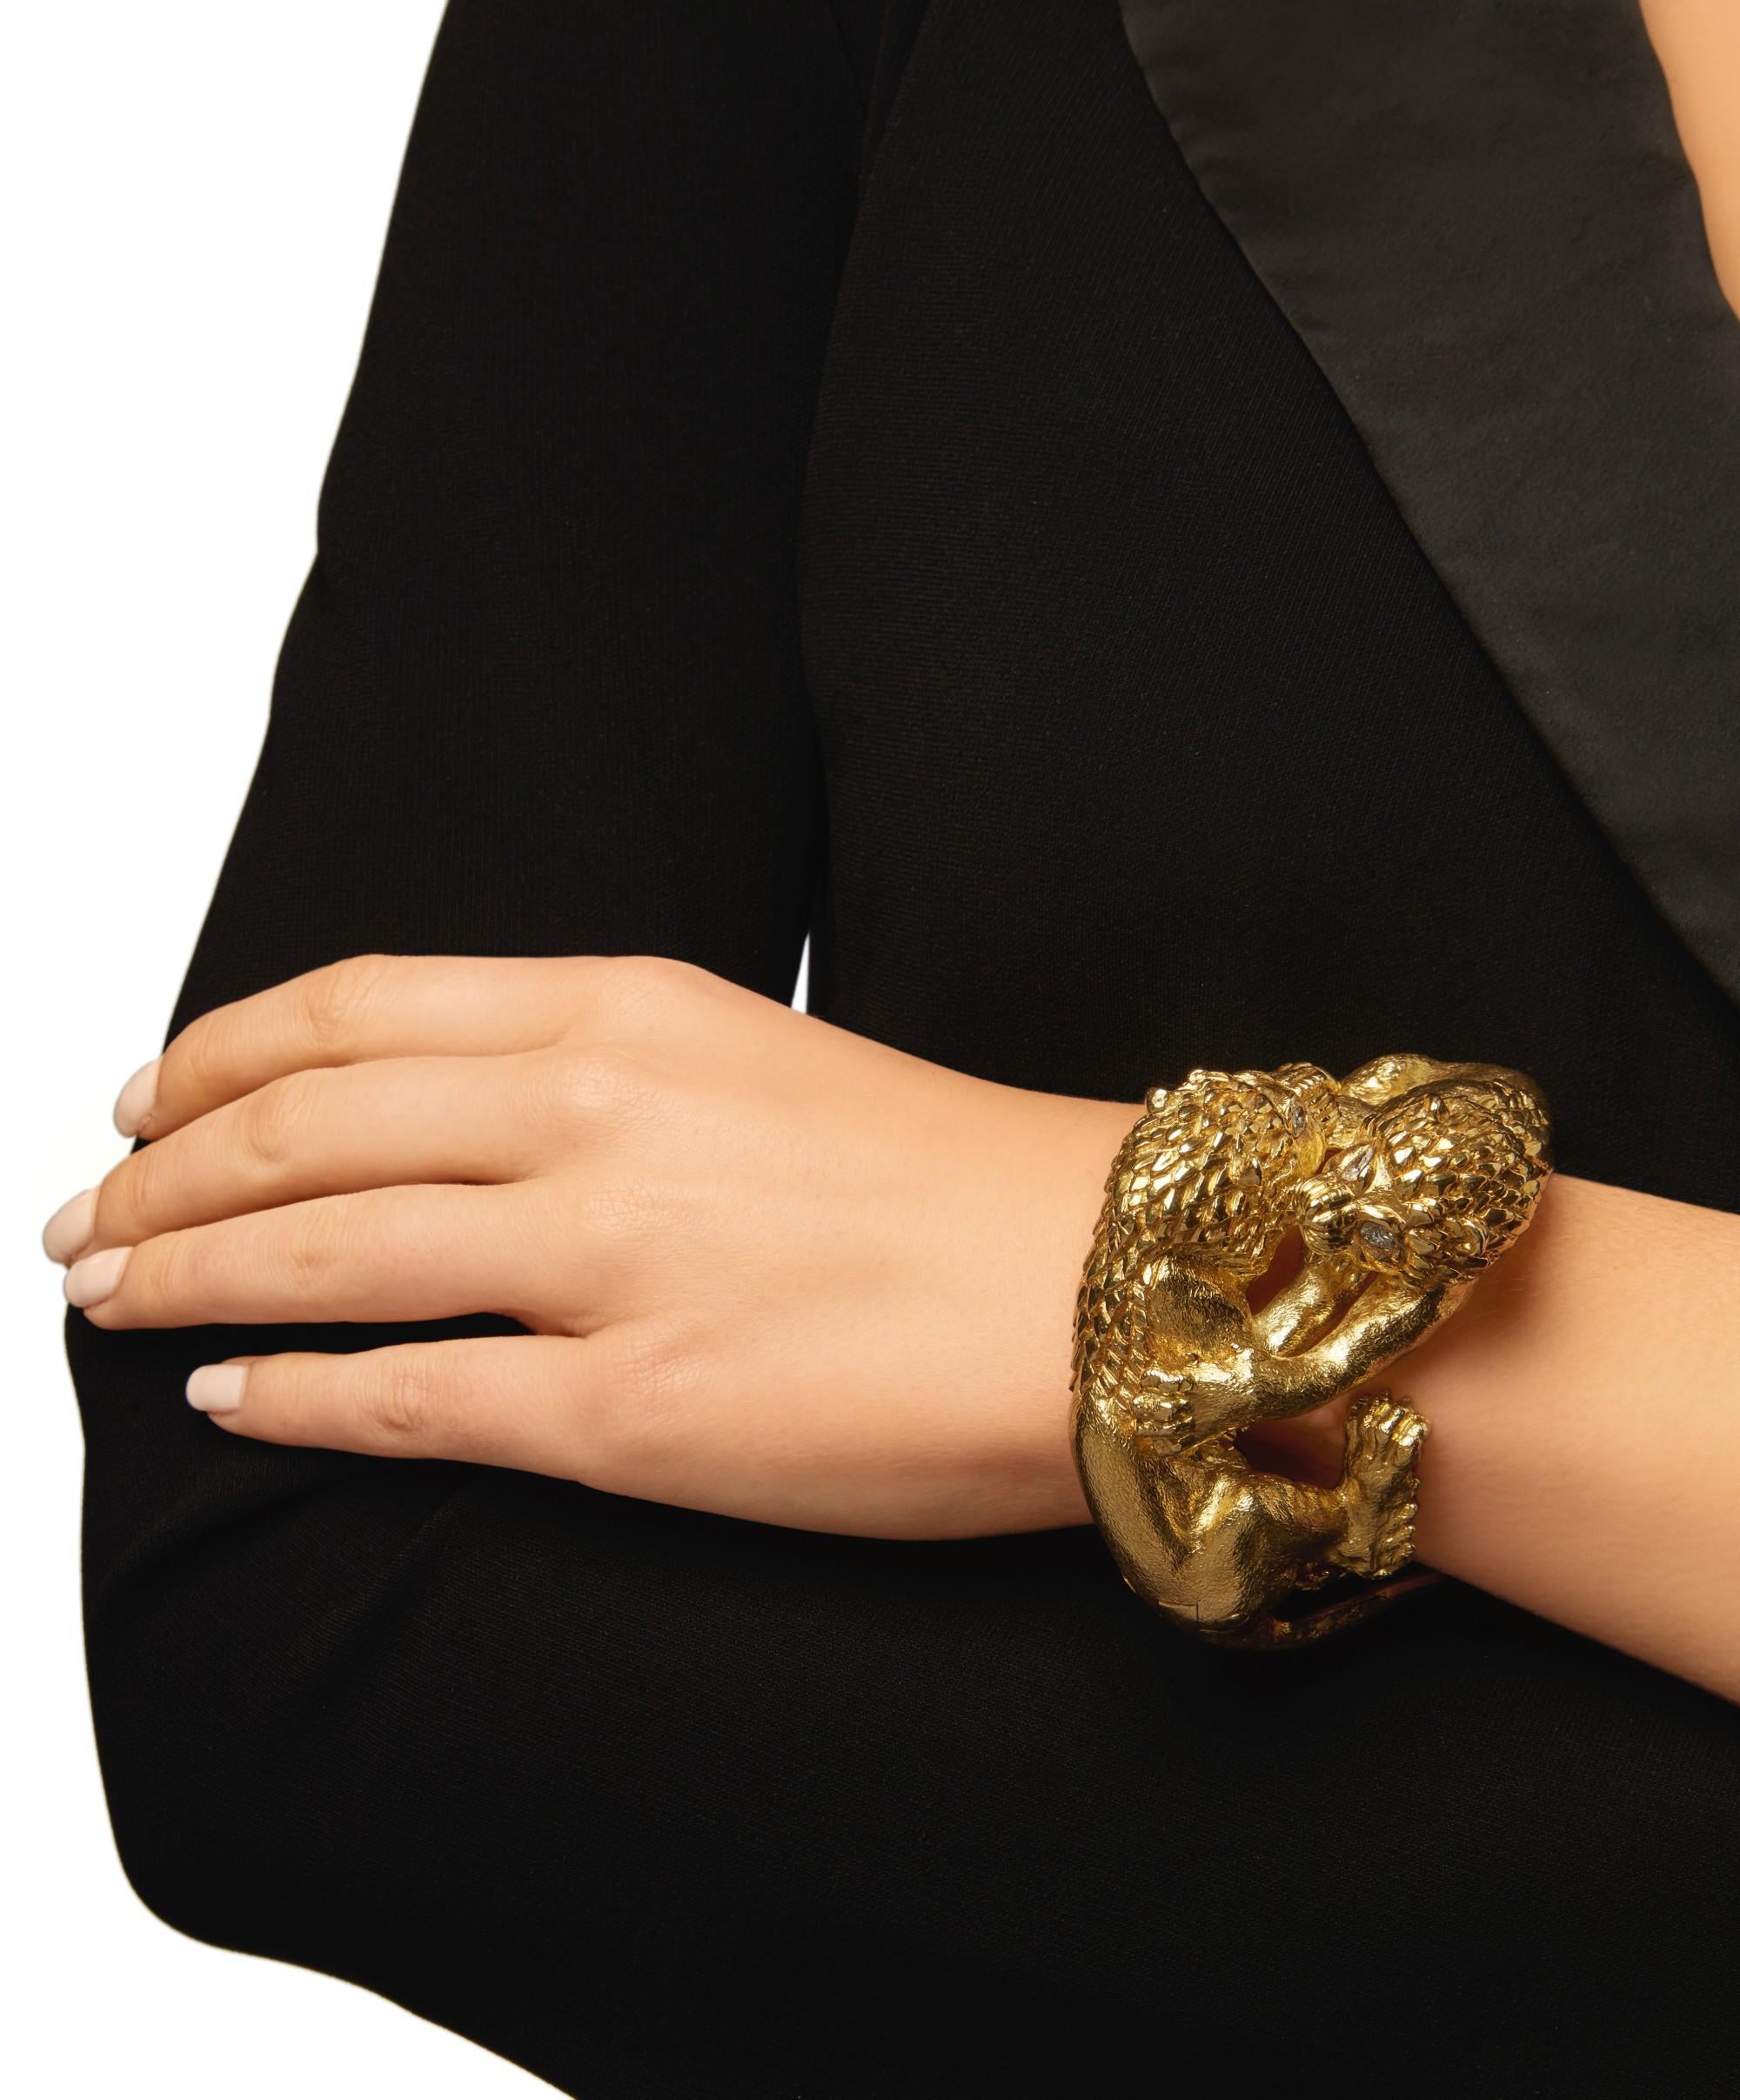 A statement cuff bracelet by David Webb featuring textured gold two lions in battle, with pear-shaped diamond eyes. Internal circumference 6½ inches.